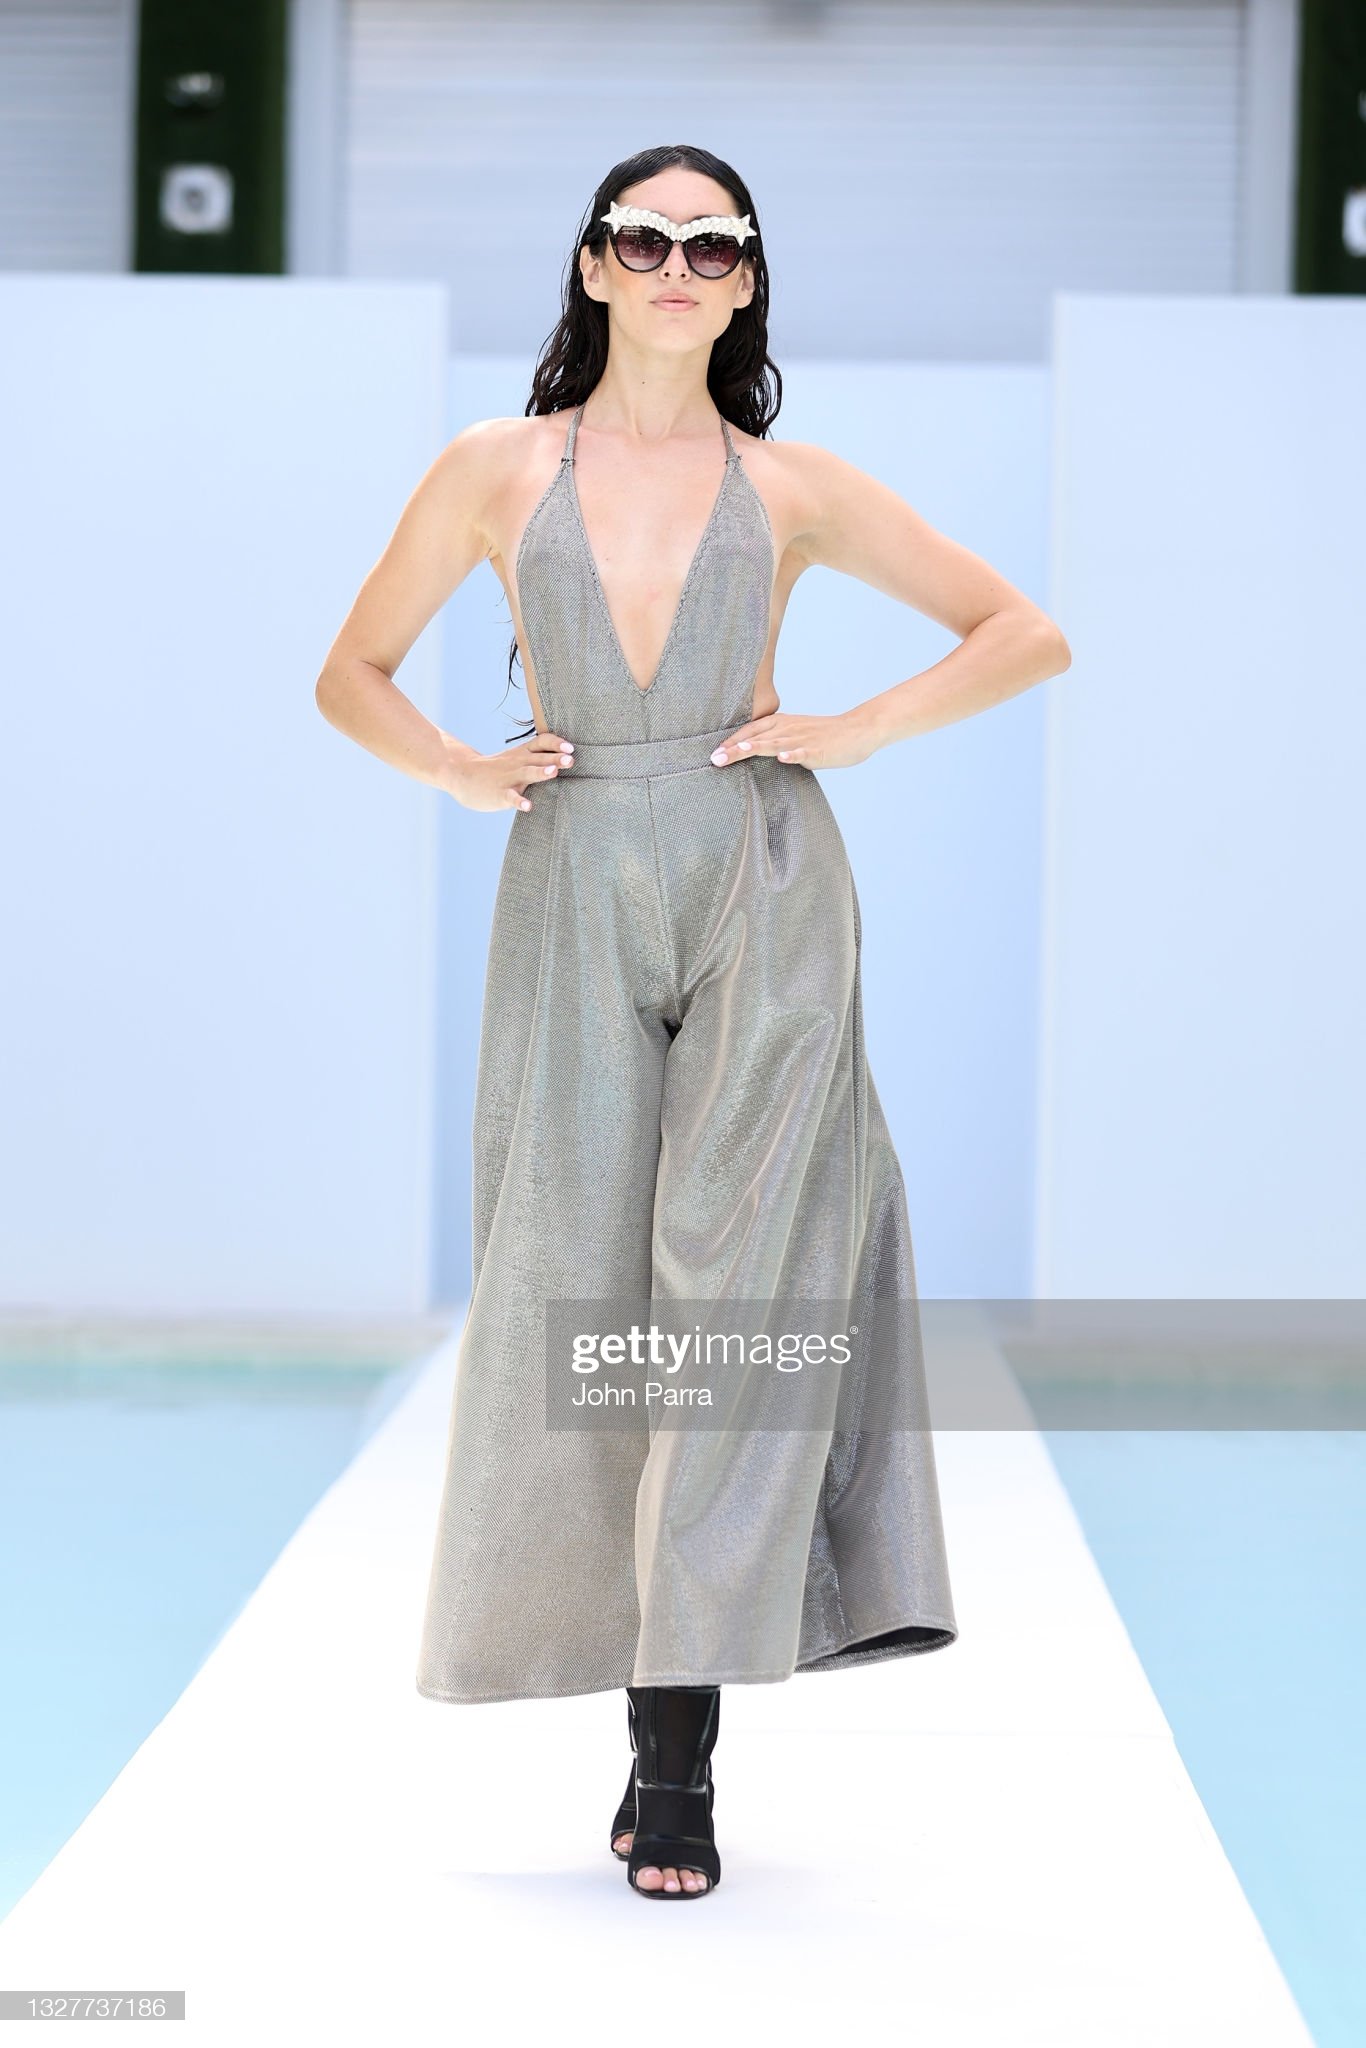 gettyimages-1327737186-2048x2048.jpg